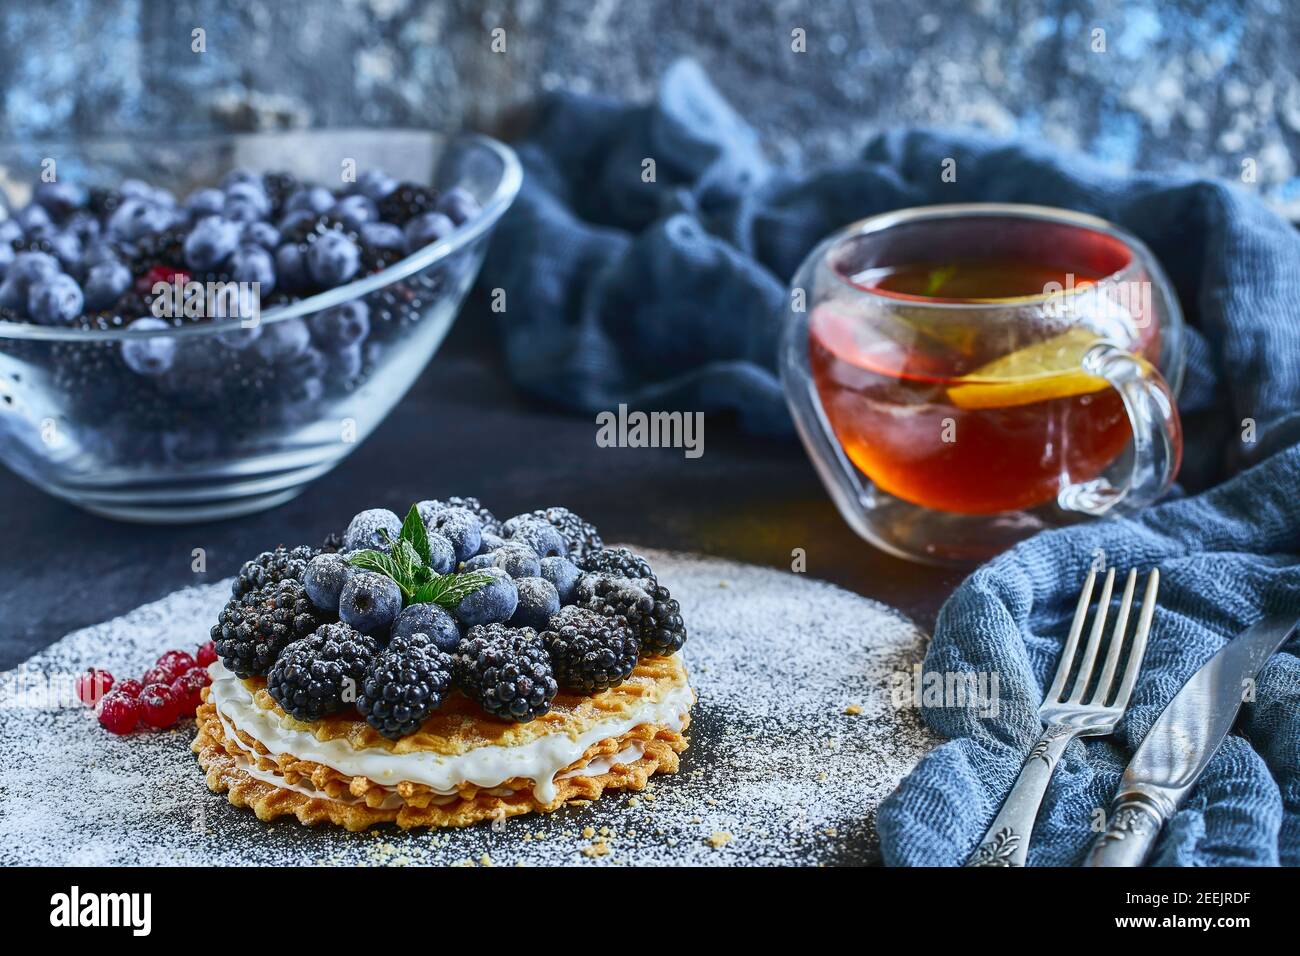 homemade waffles with blueberries and blackberries, powdered sugar on a stone plate with fruit. Shallow depth of field. Stock Photo